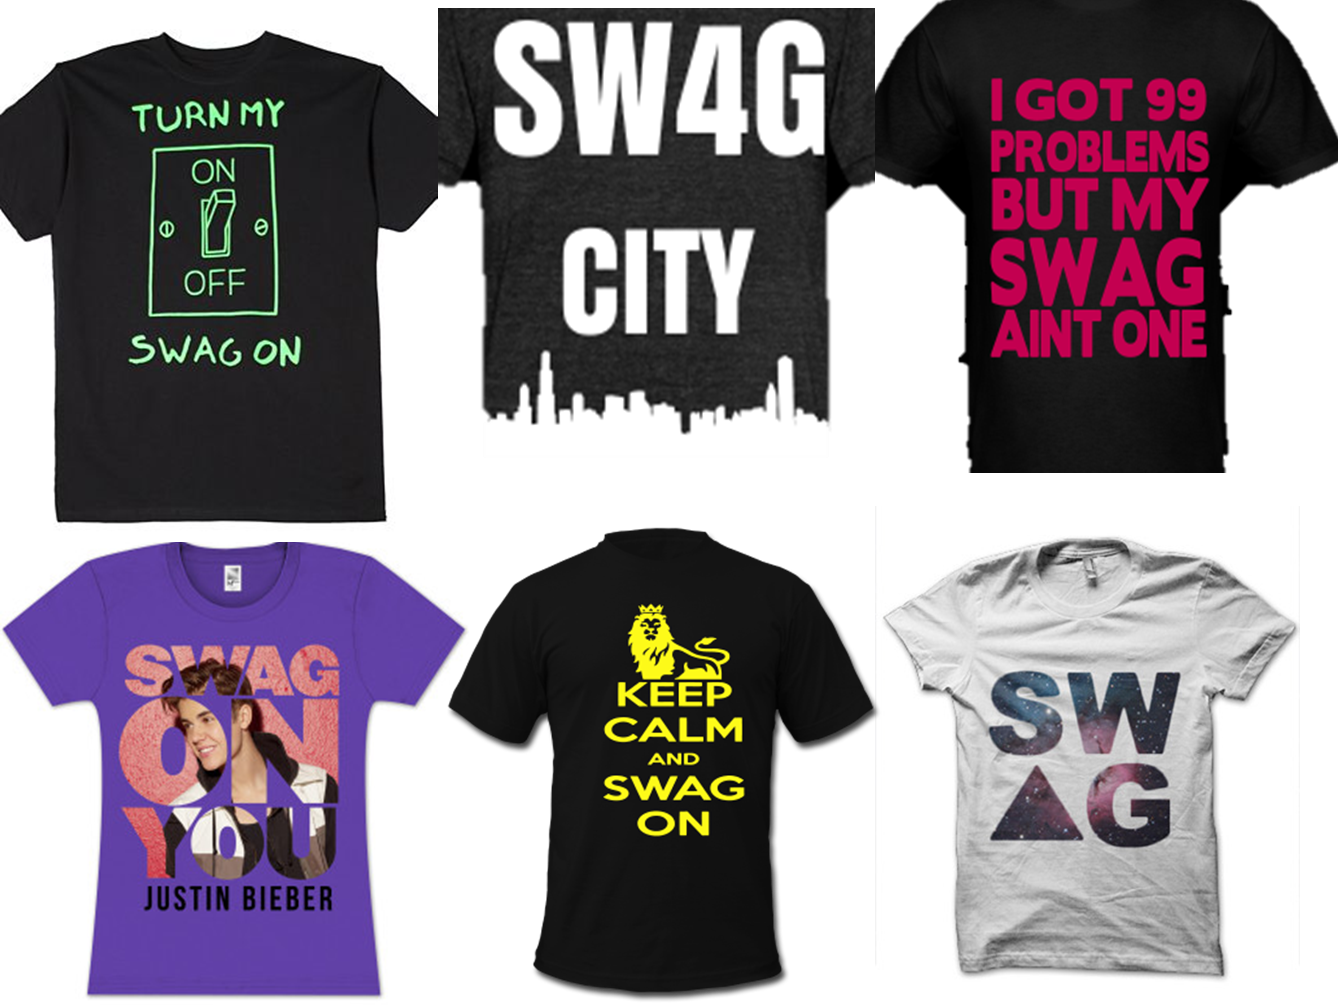 Some “Swag” Swag